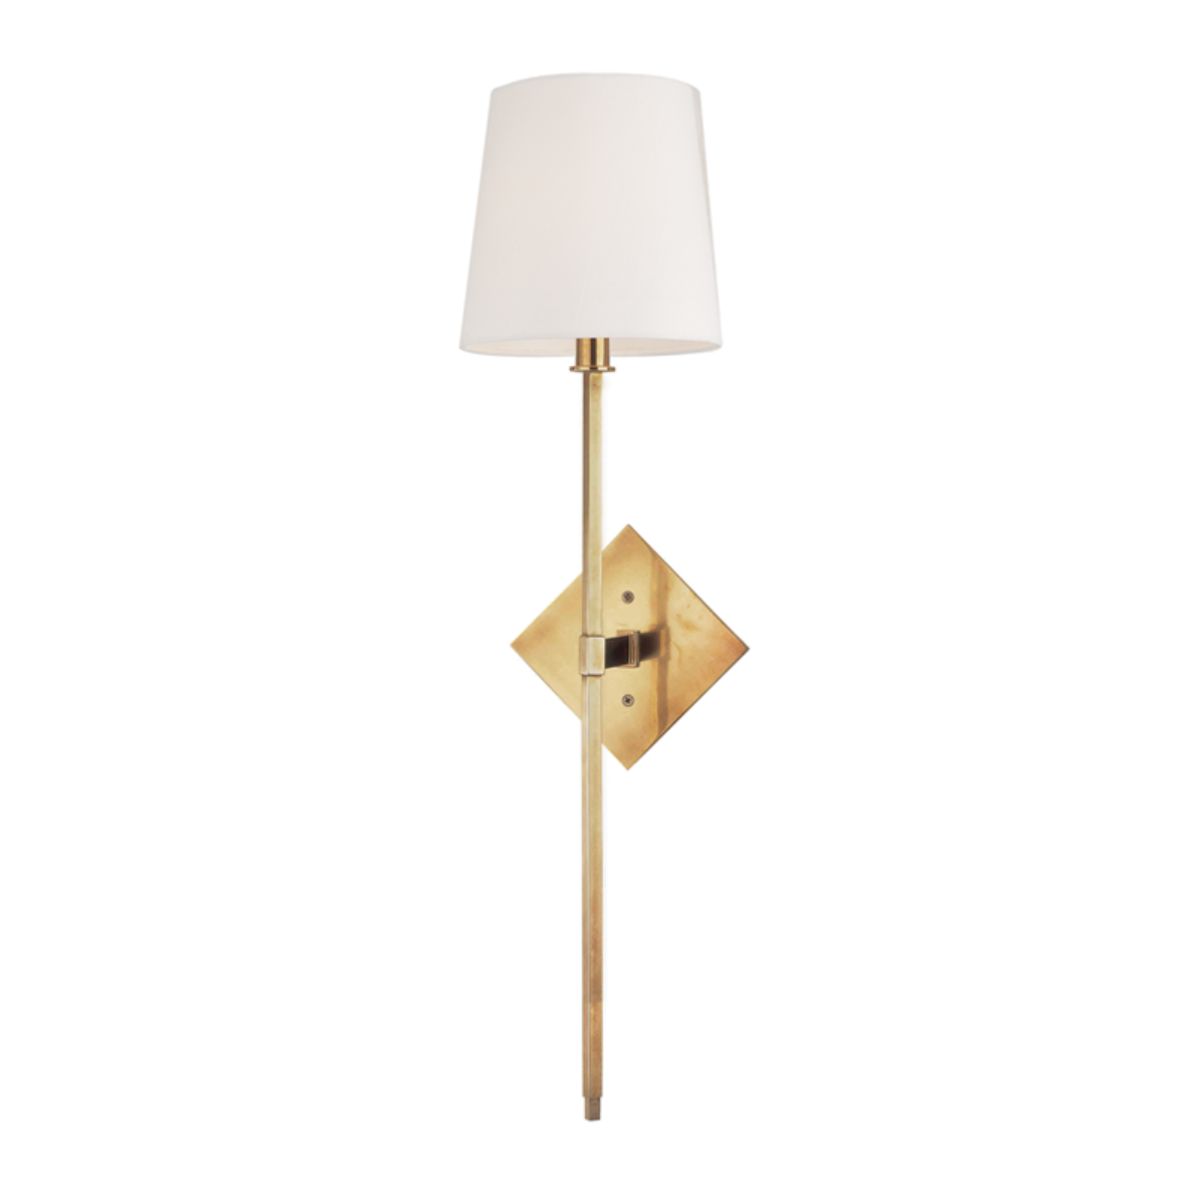 Cortland 26 in. Armed Sconce